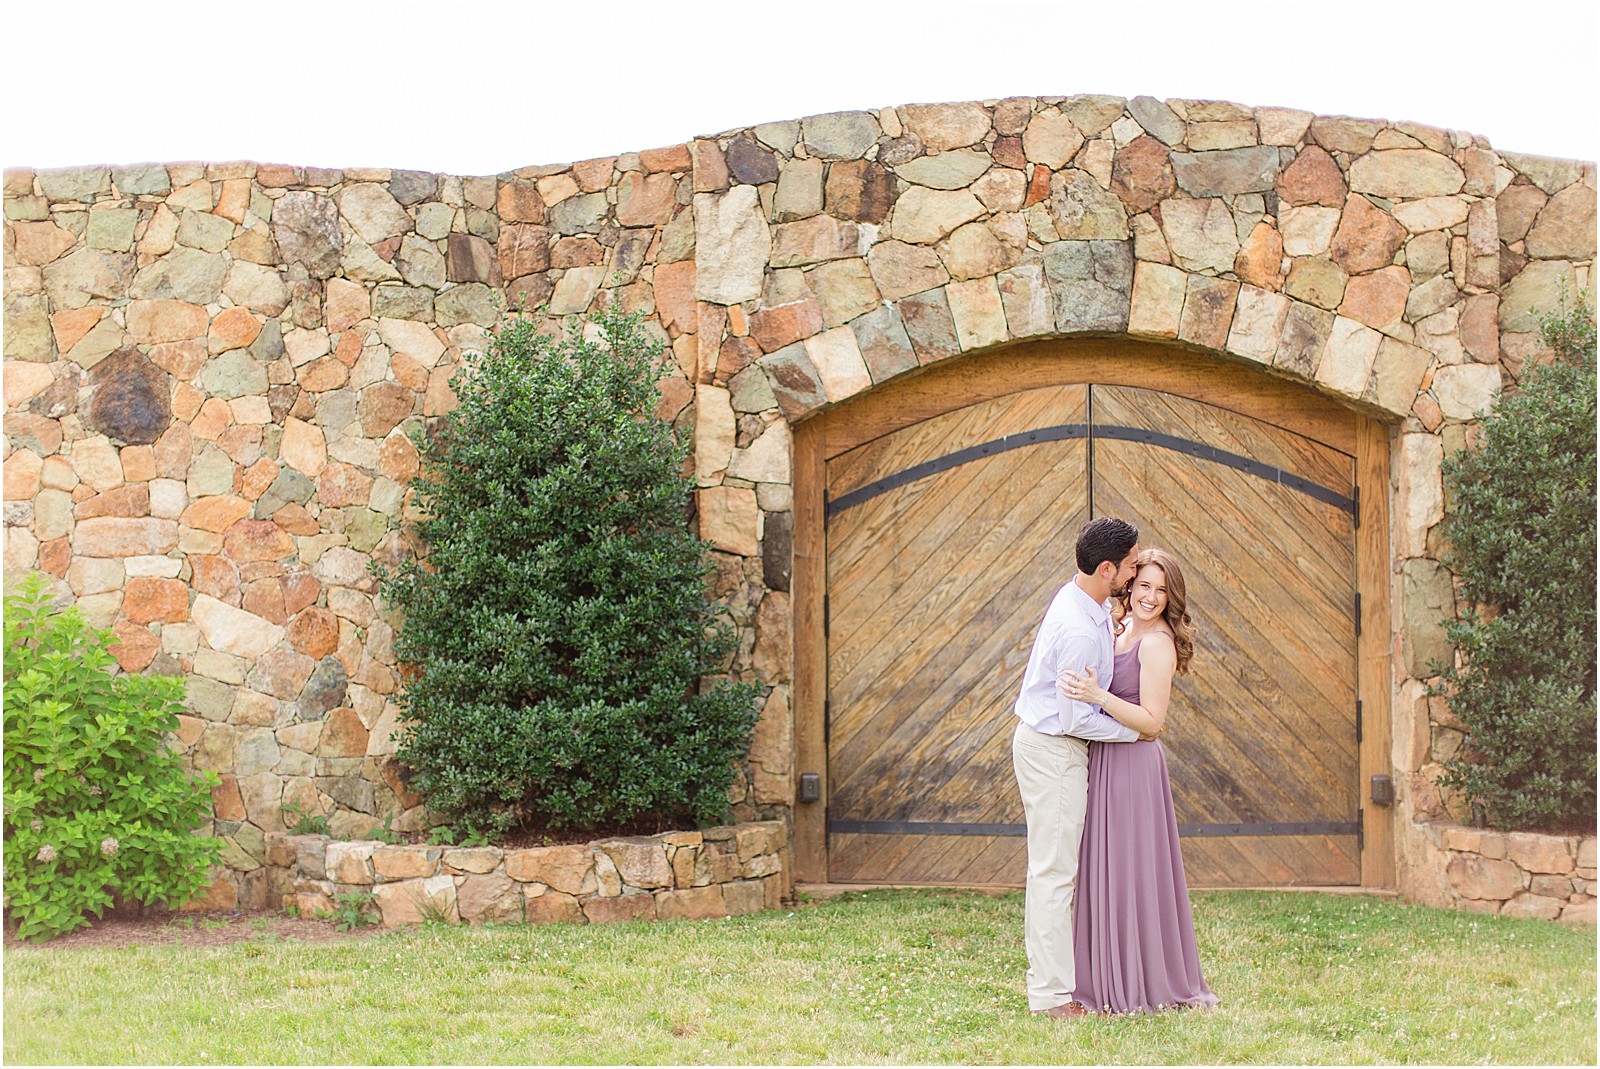 A Stone Tower Winery Leesburgh Engagement Session | Caitlin and Jason 001.jpg